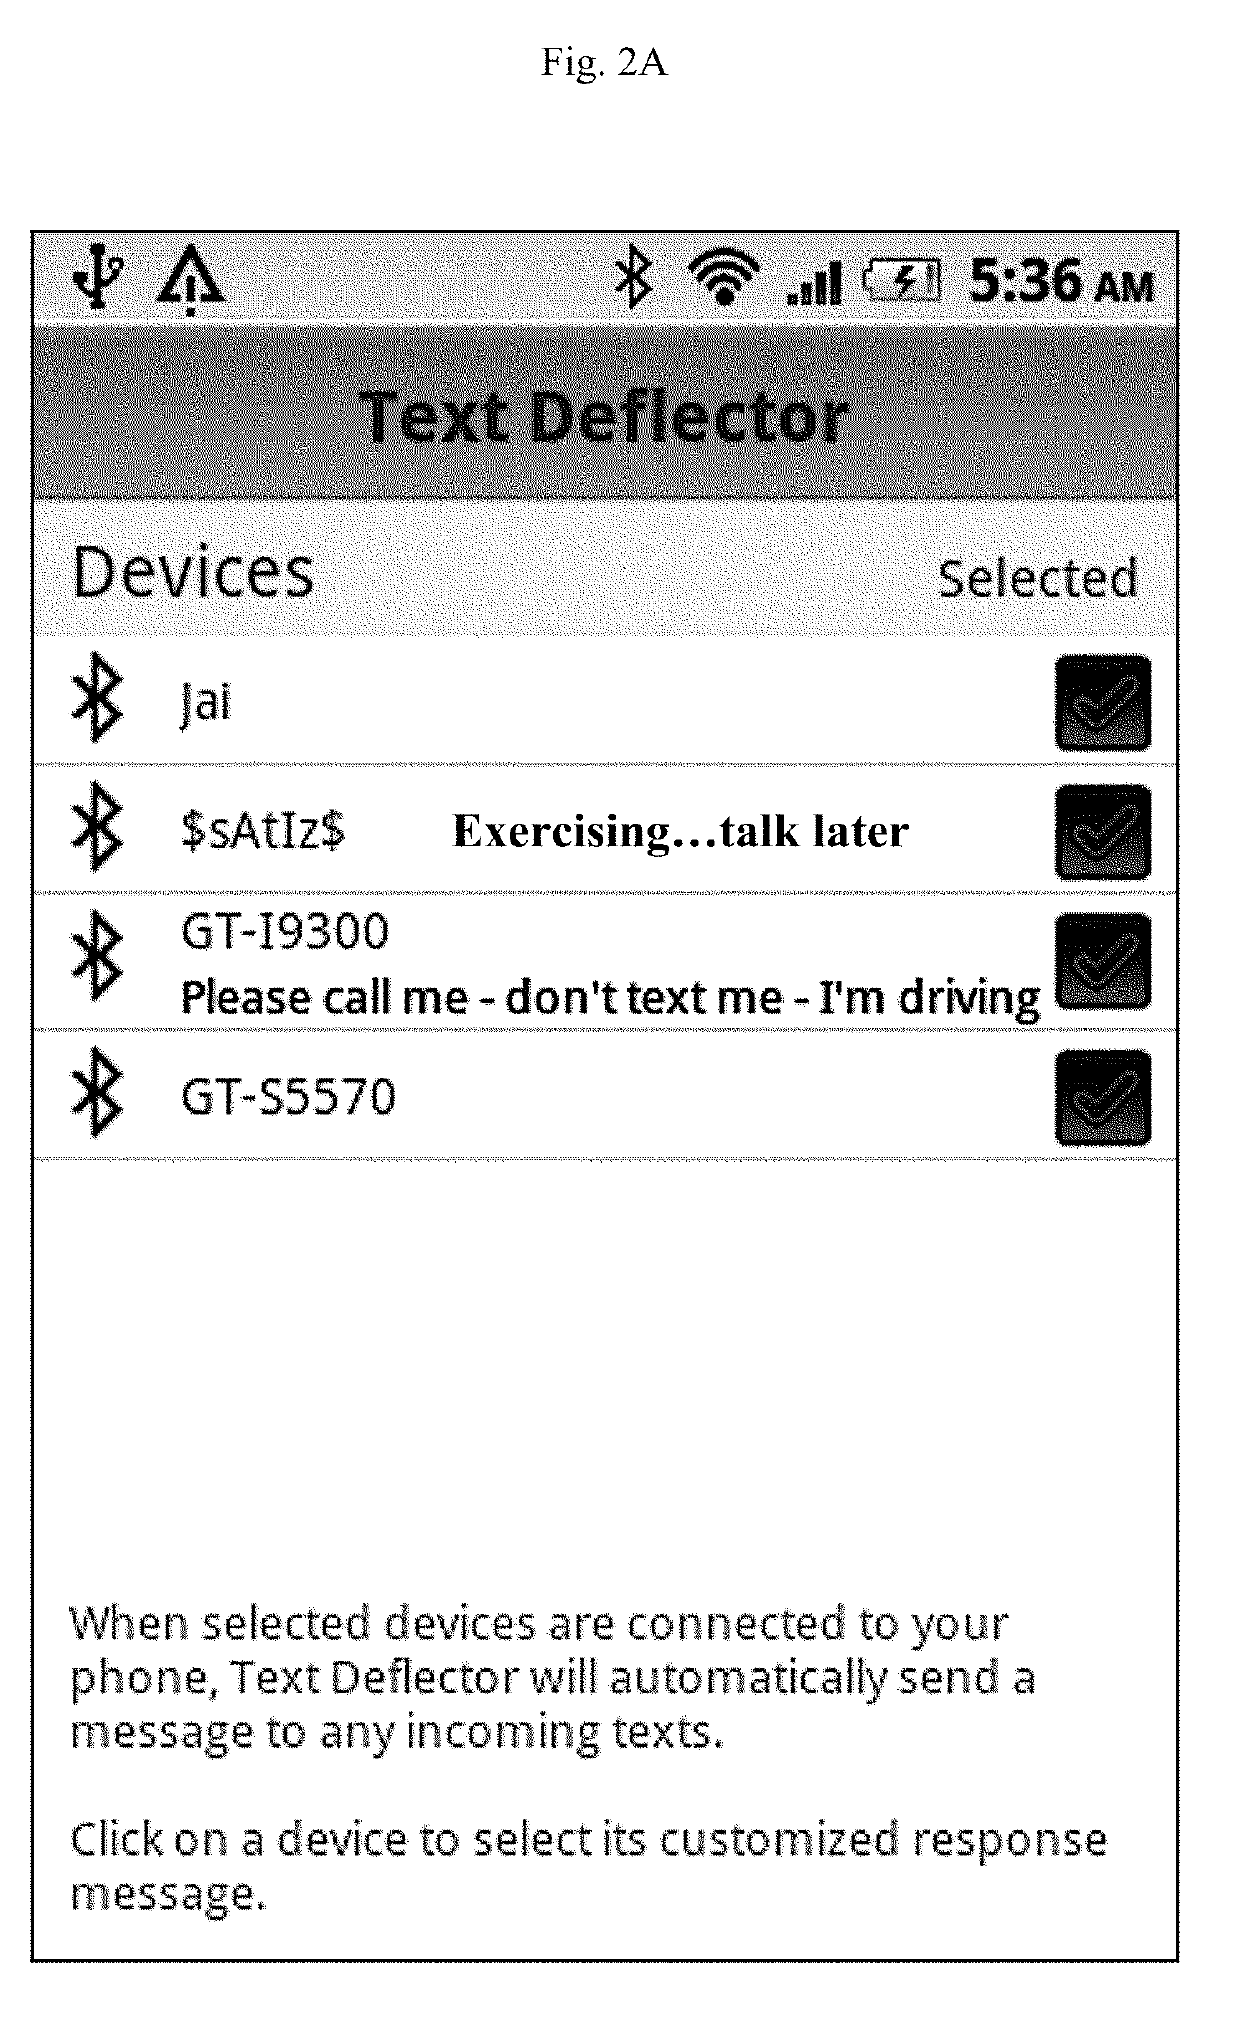 System to help prevent distracted driving